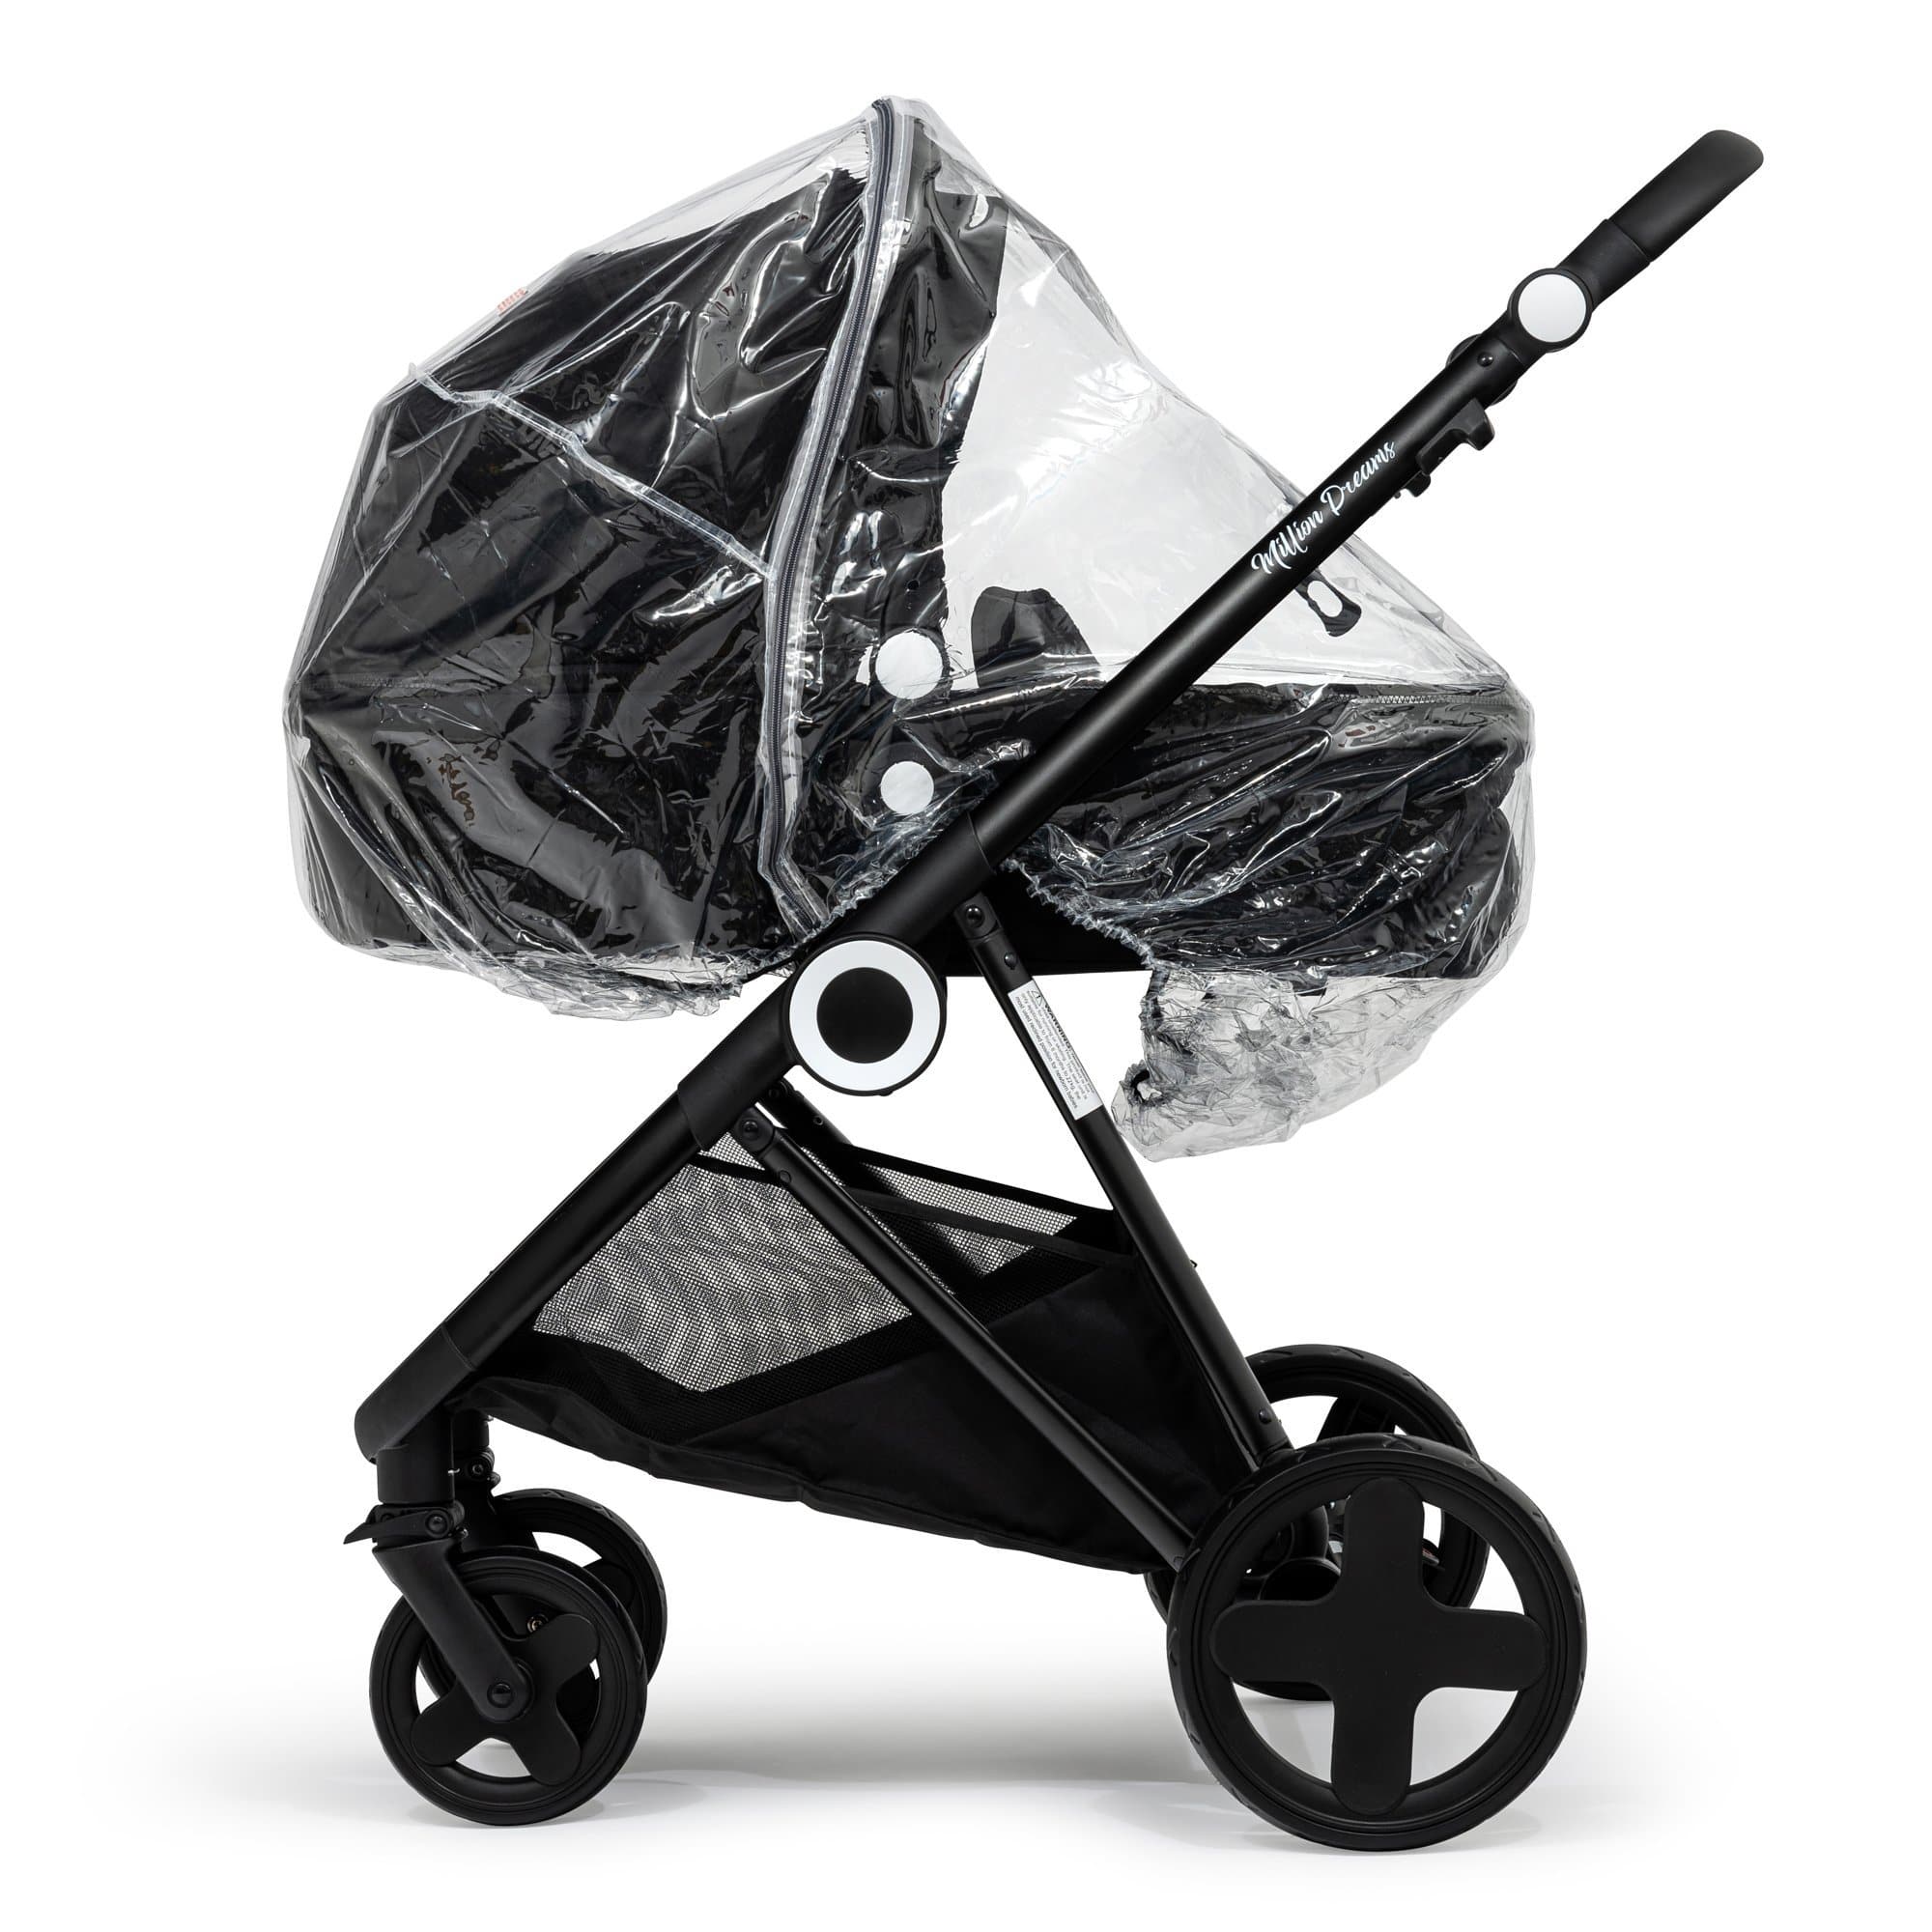 2 in 1 Rain Cover Compatible with Stokke - Fits All Models - For Your Little One